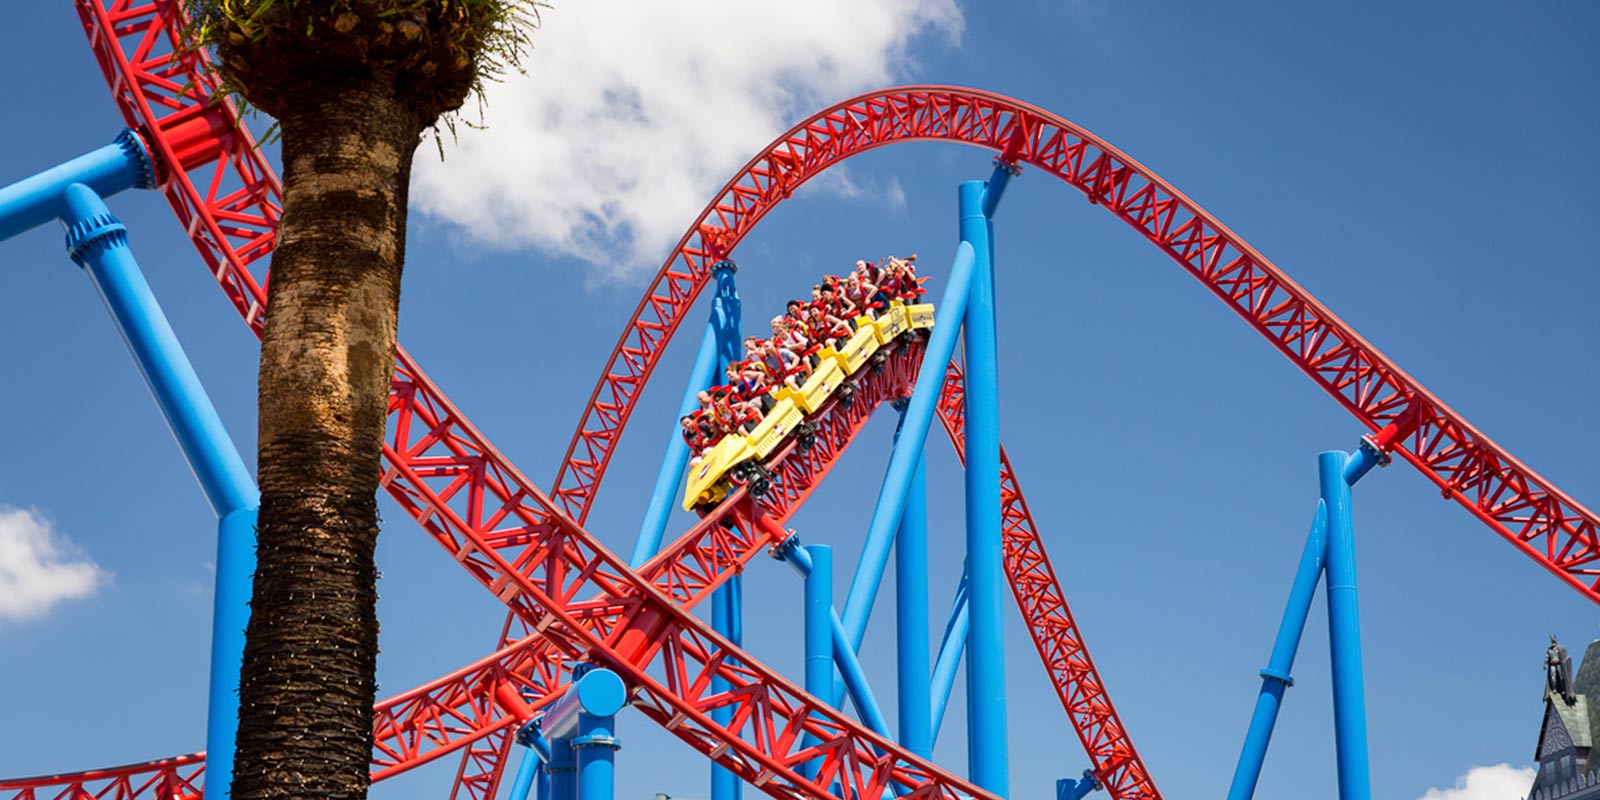 Theme Park Tickets & Passes, Gold Coast Attractions